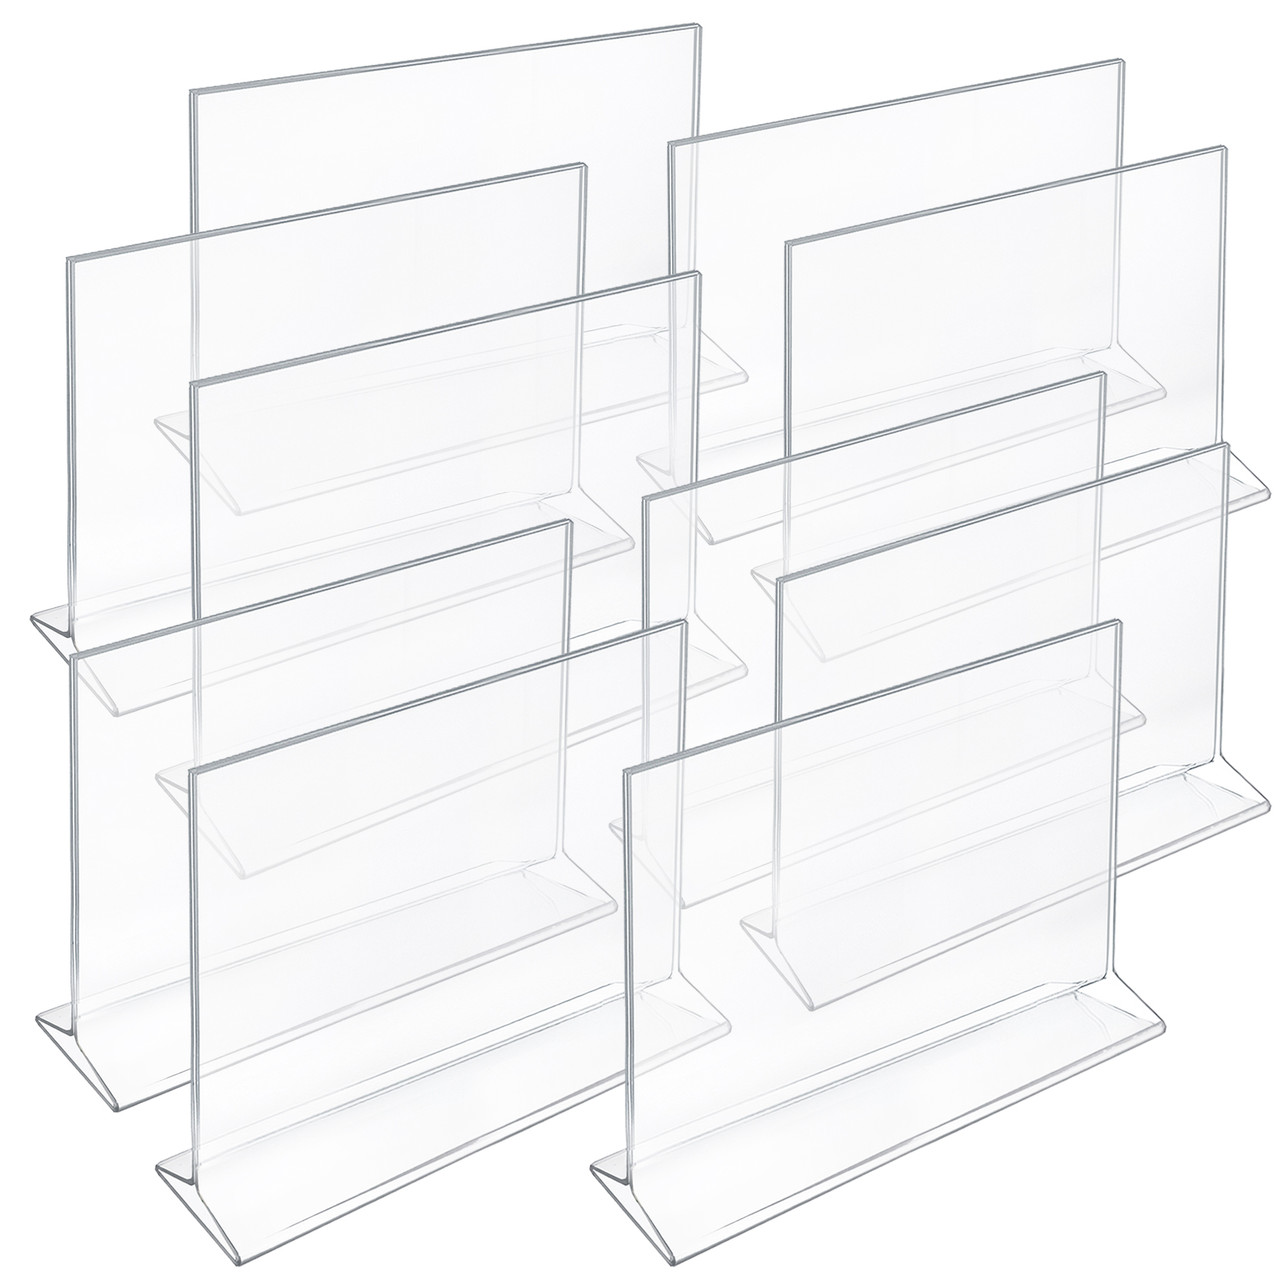 Azar Displays Top-Load Acrylic Sign Holders, 11 x 8 1/2, Clear, Pack Of 10